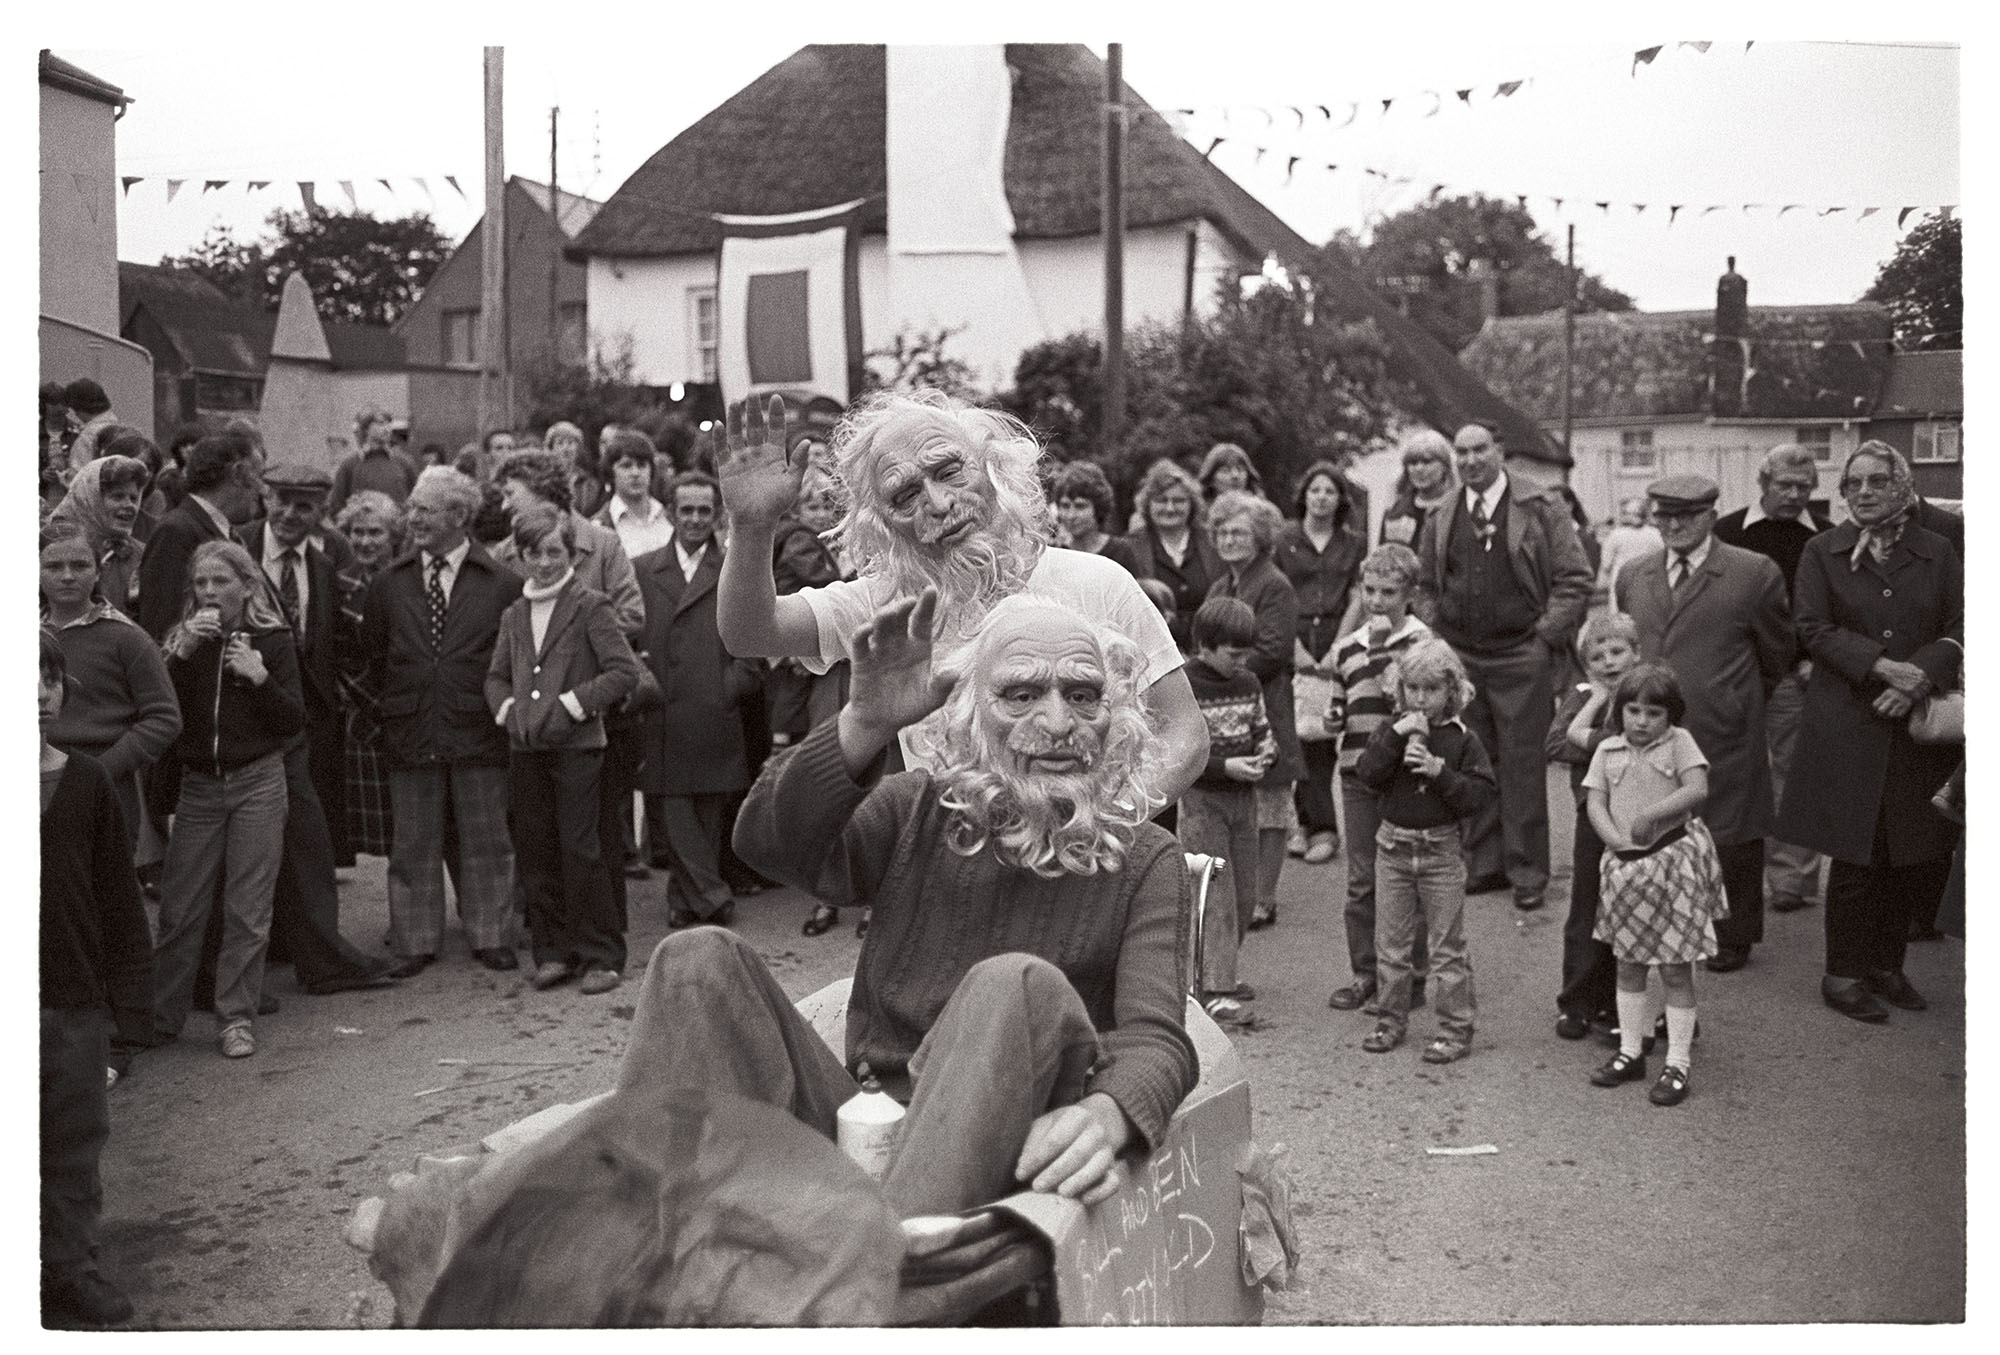 Village Fair, fancy dress, boys in masks in pram. <br /> [Two boys in masks, one in a pram, in a street at Winkleigh Fair, with a crowd of people watching them, and cottages and bunting in the background.]